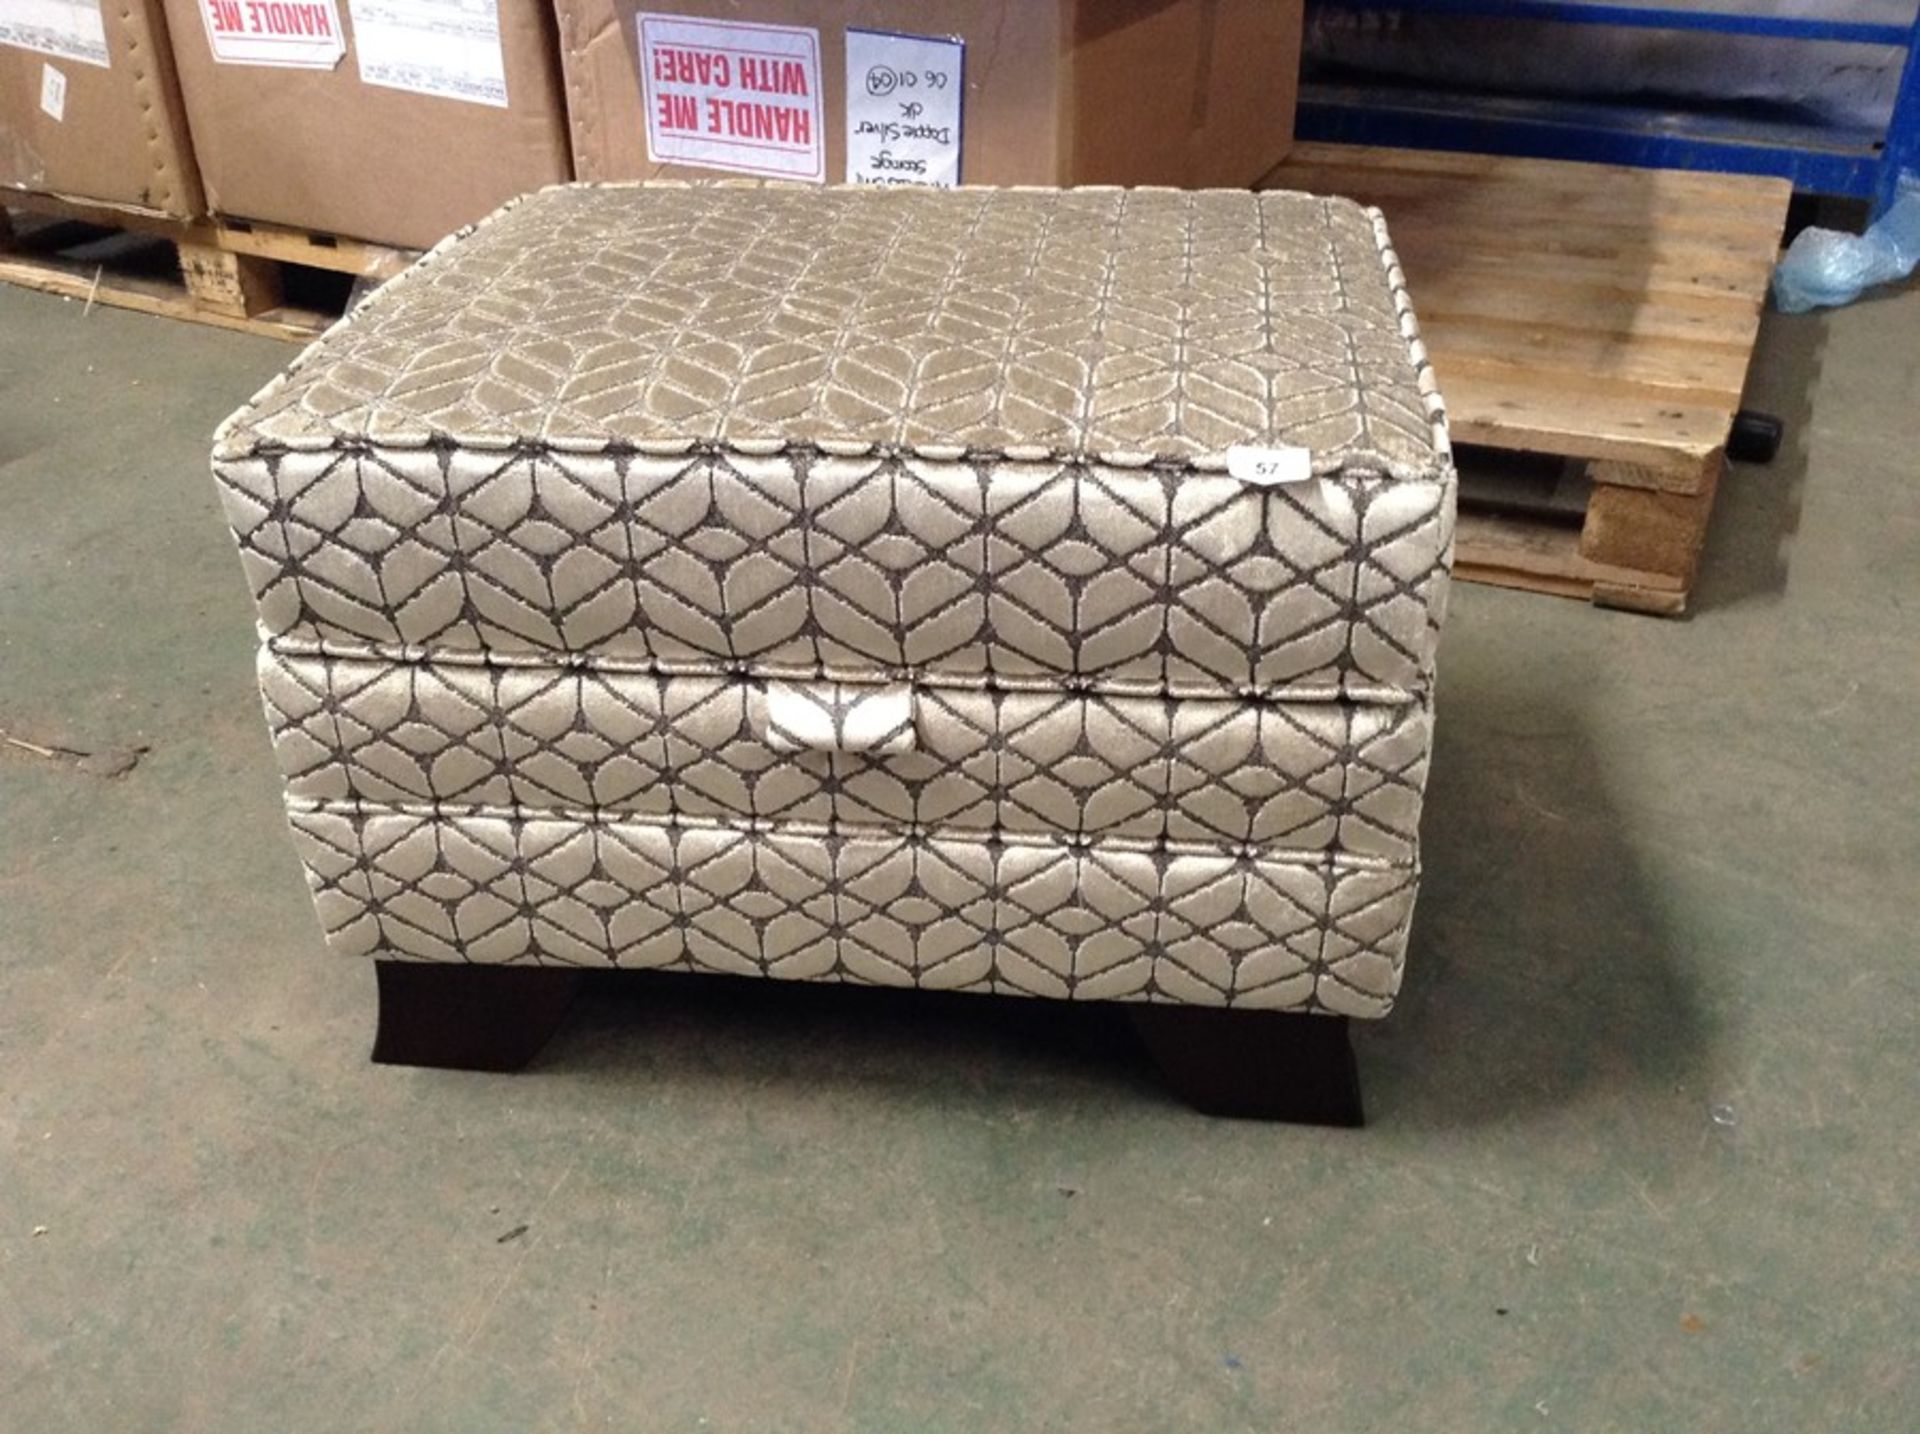 GOLD PATTERNED STORAGE FOOTSTOOL (HH29-697401-38)